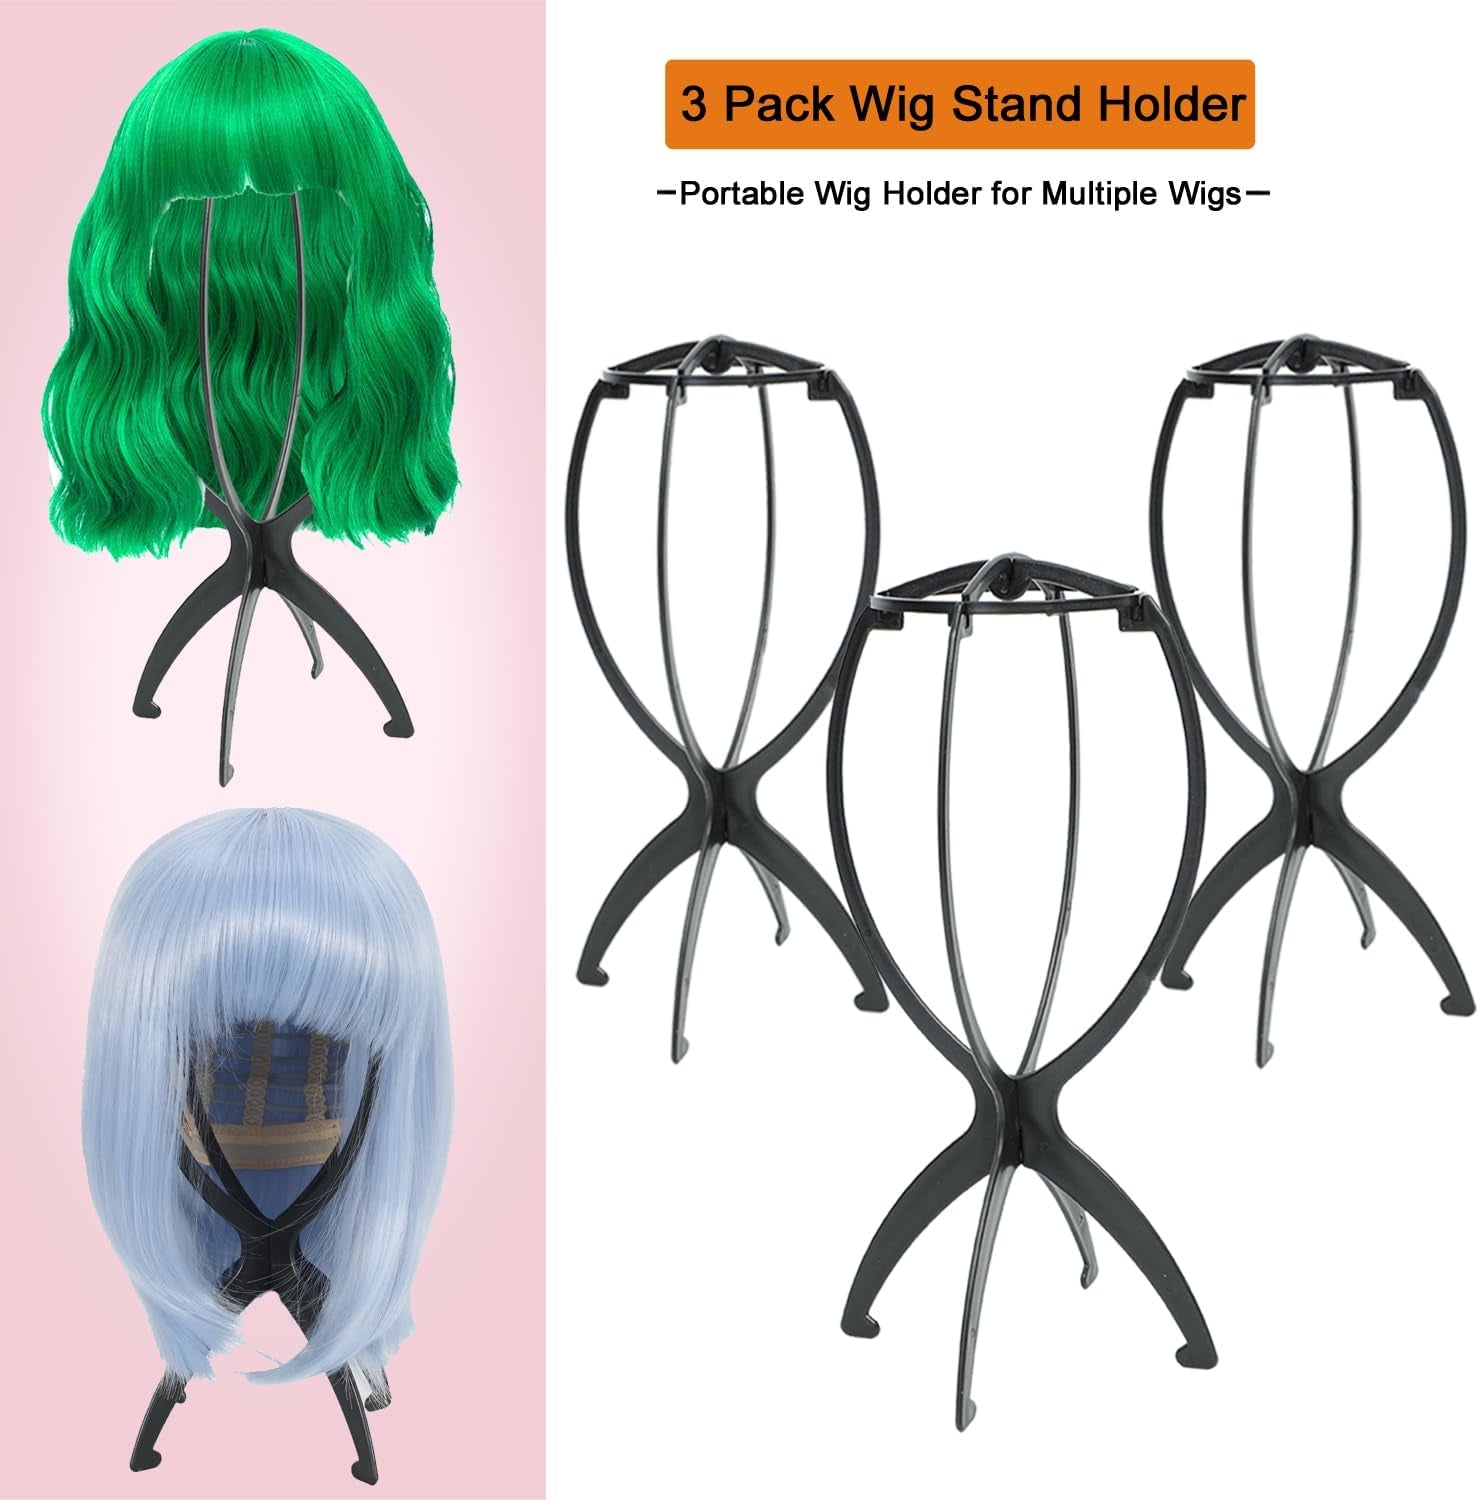 3 Pack Wig Stand Holder, Portable Collapsible Wig Holder for Multiple Wigs, Durable Wig Stands for Women Wig Drying Stand Travel Wig Holder Stand Wigs Display Stand Tool (Black)